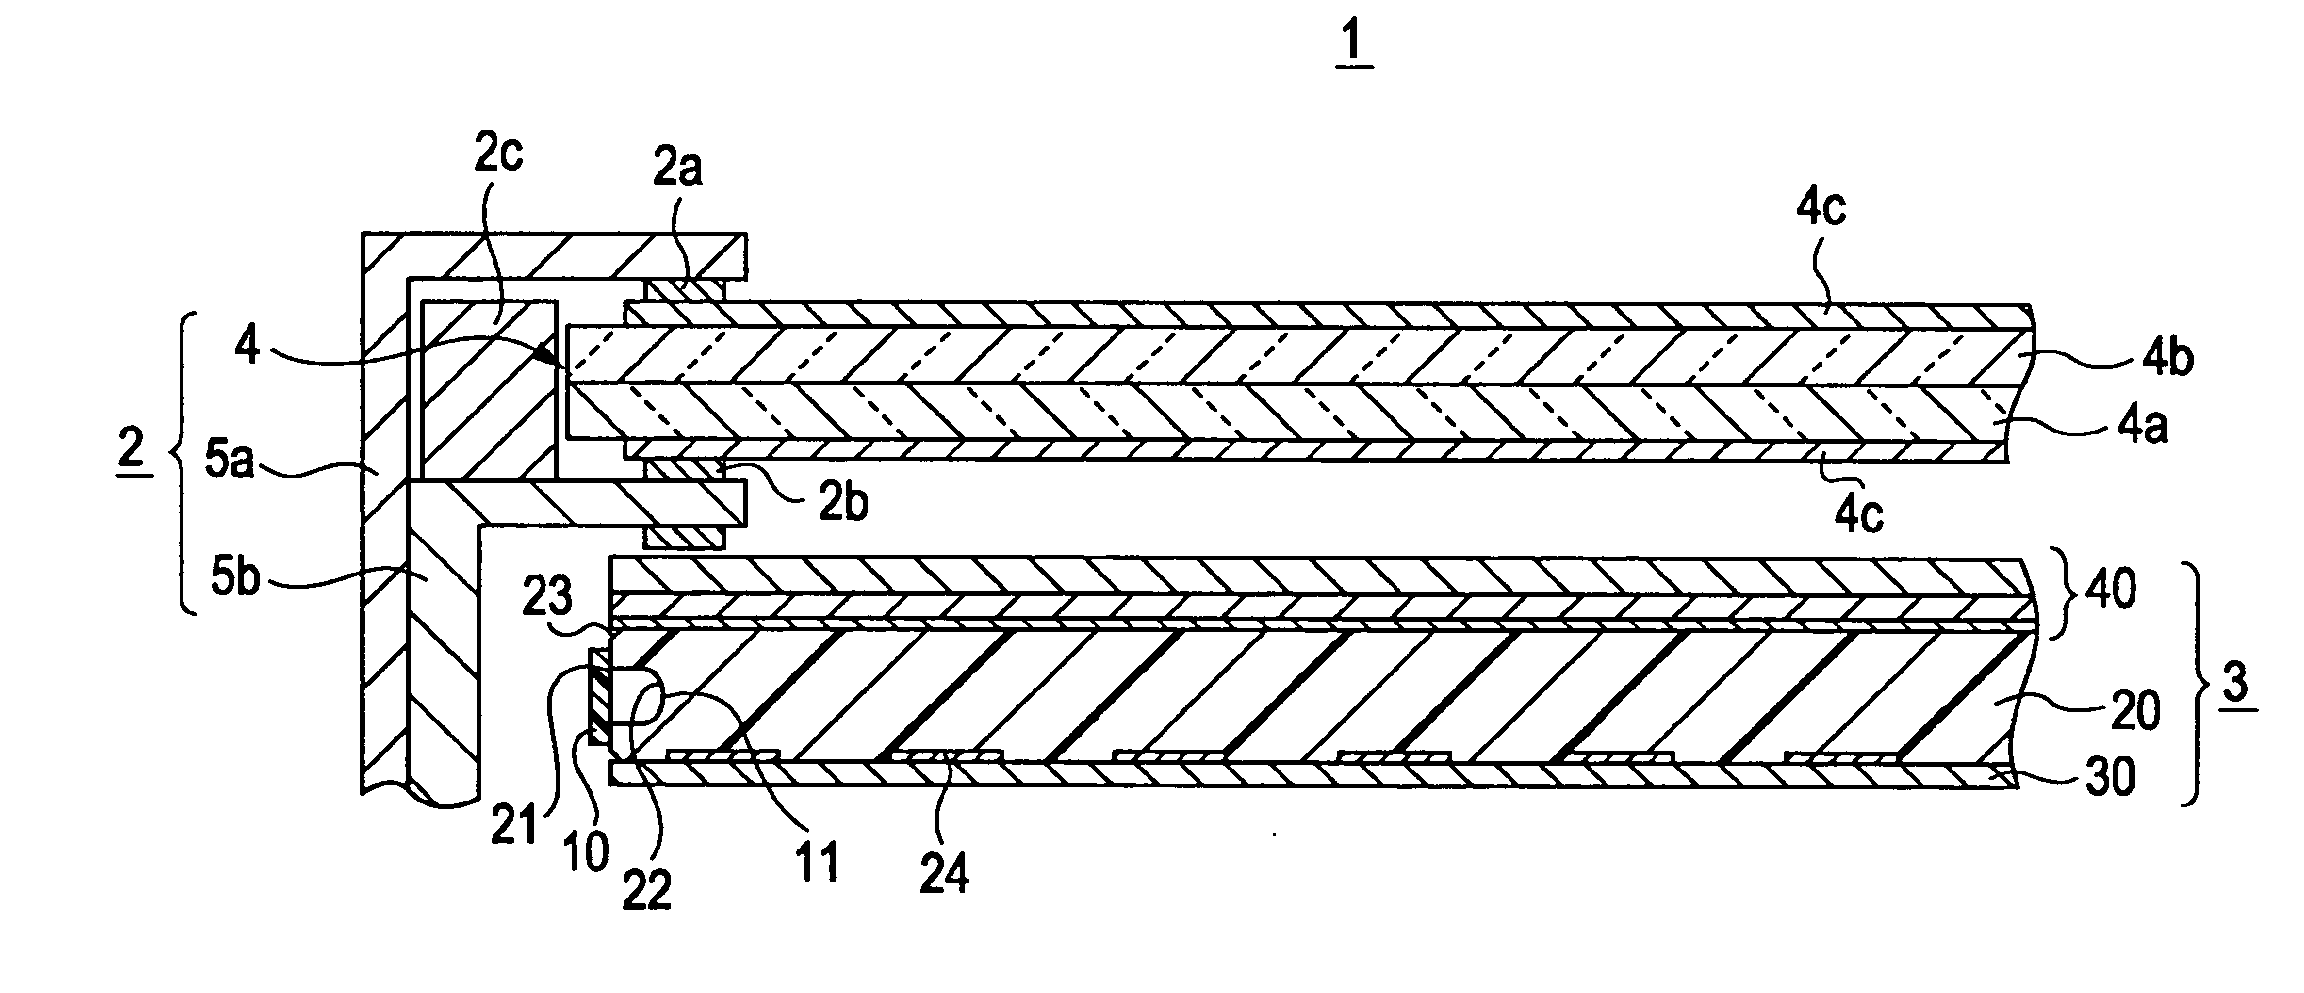 Backlight unit and liquid crystal display device